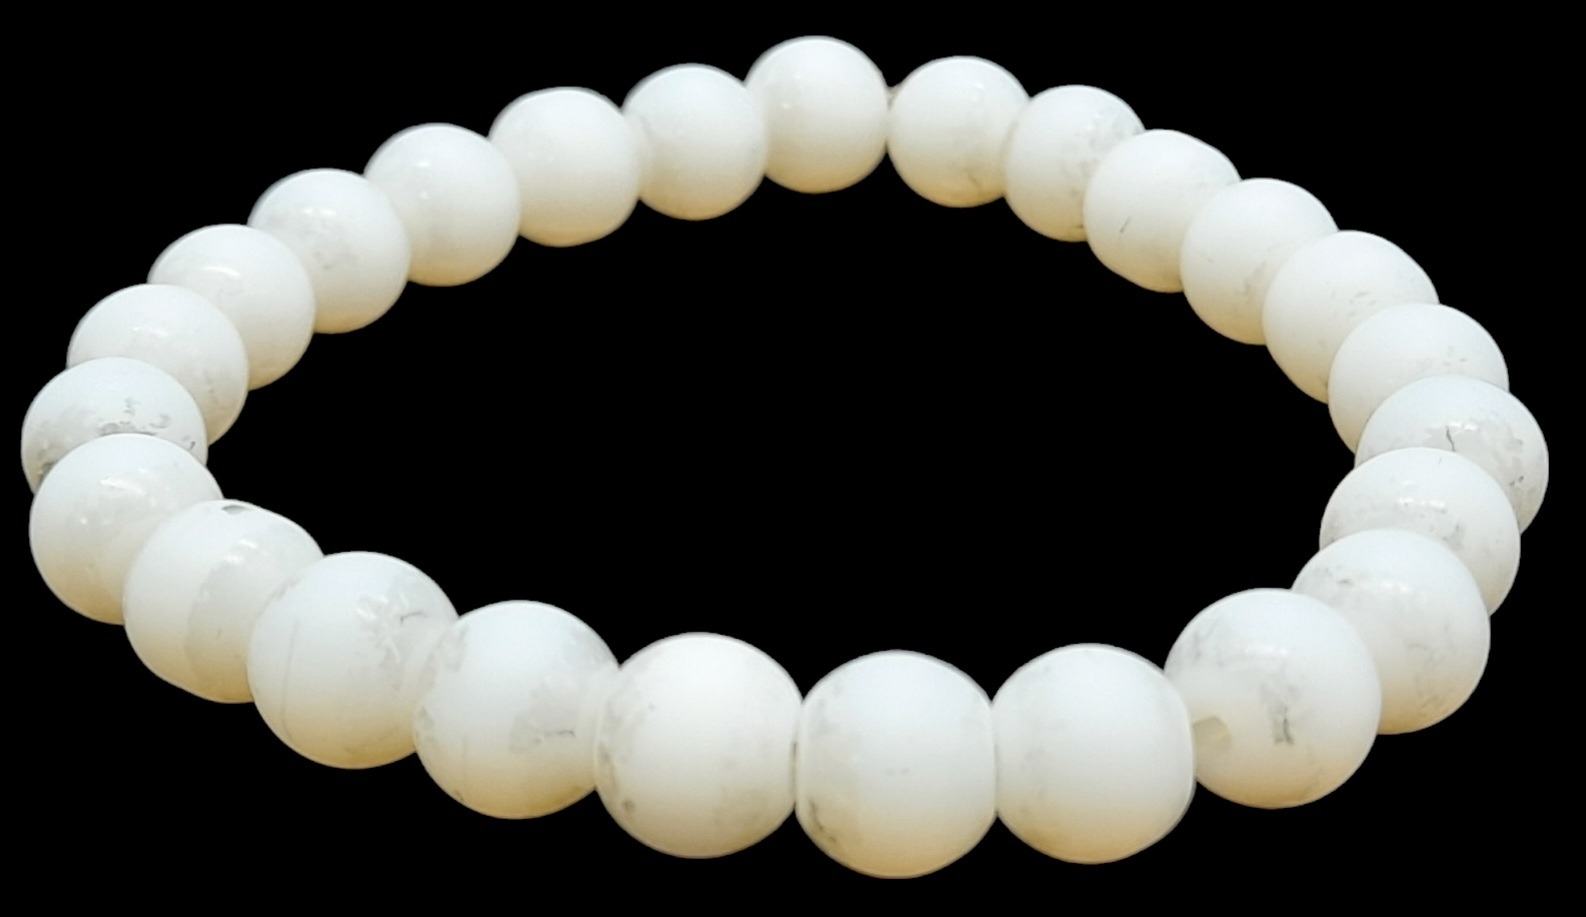 An Amazonite Expandable Bracelet. 7mm beads, 16g total weight. - Image 2 of 4